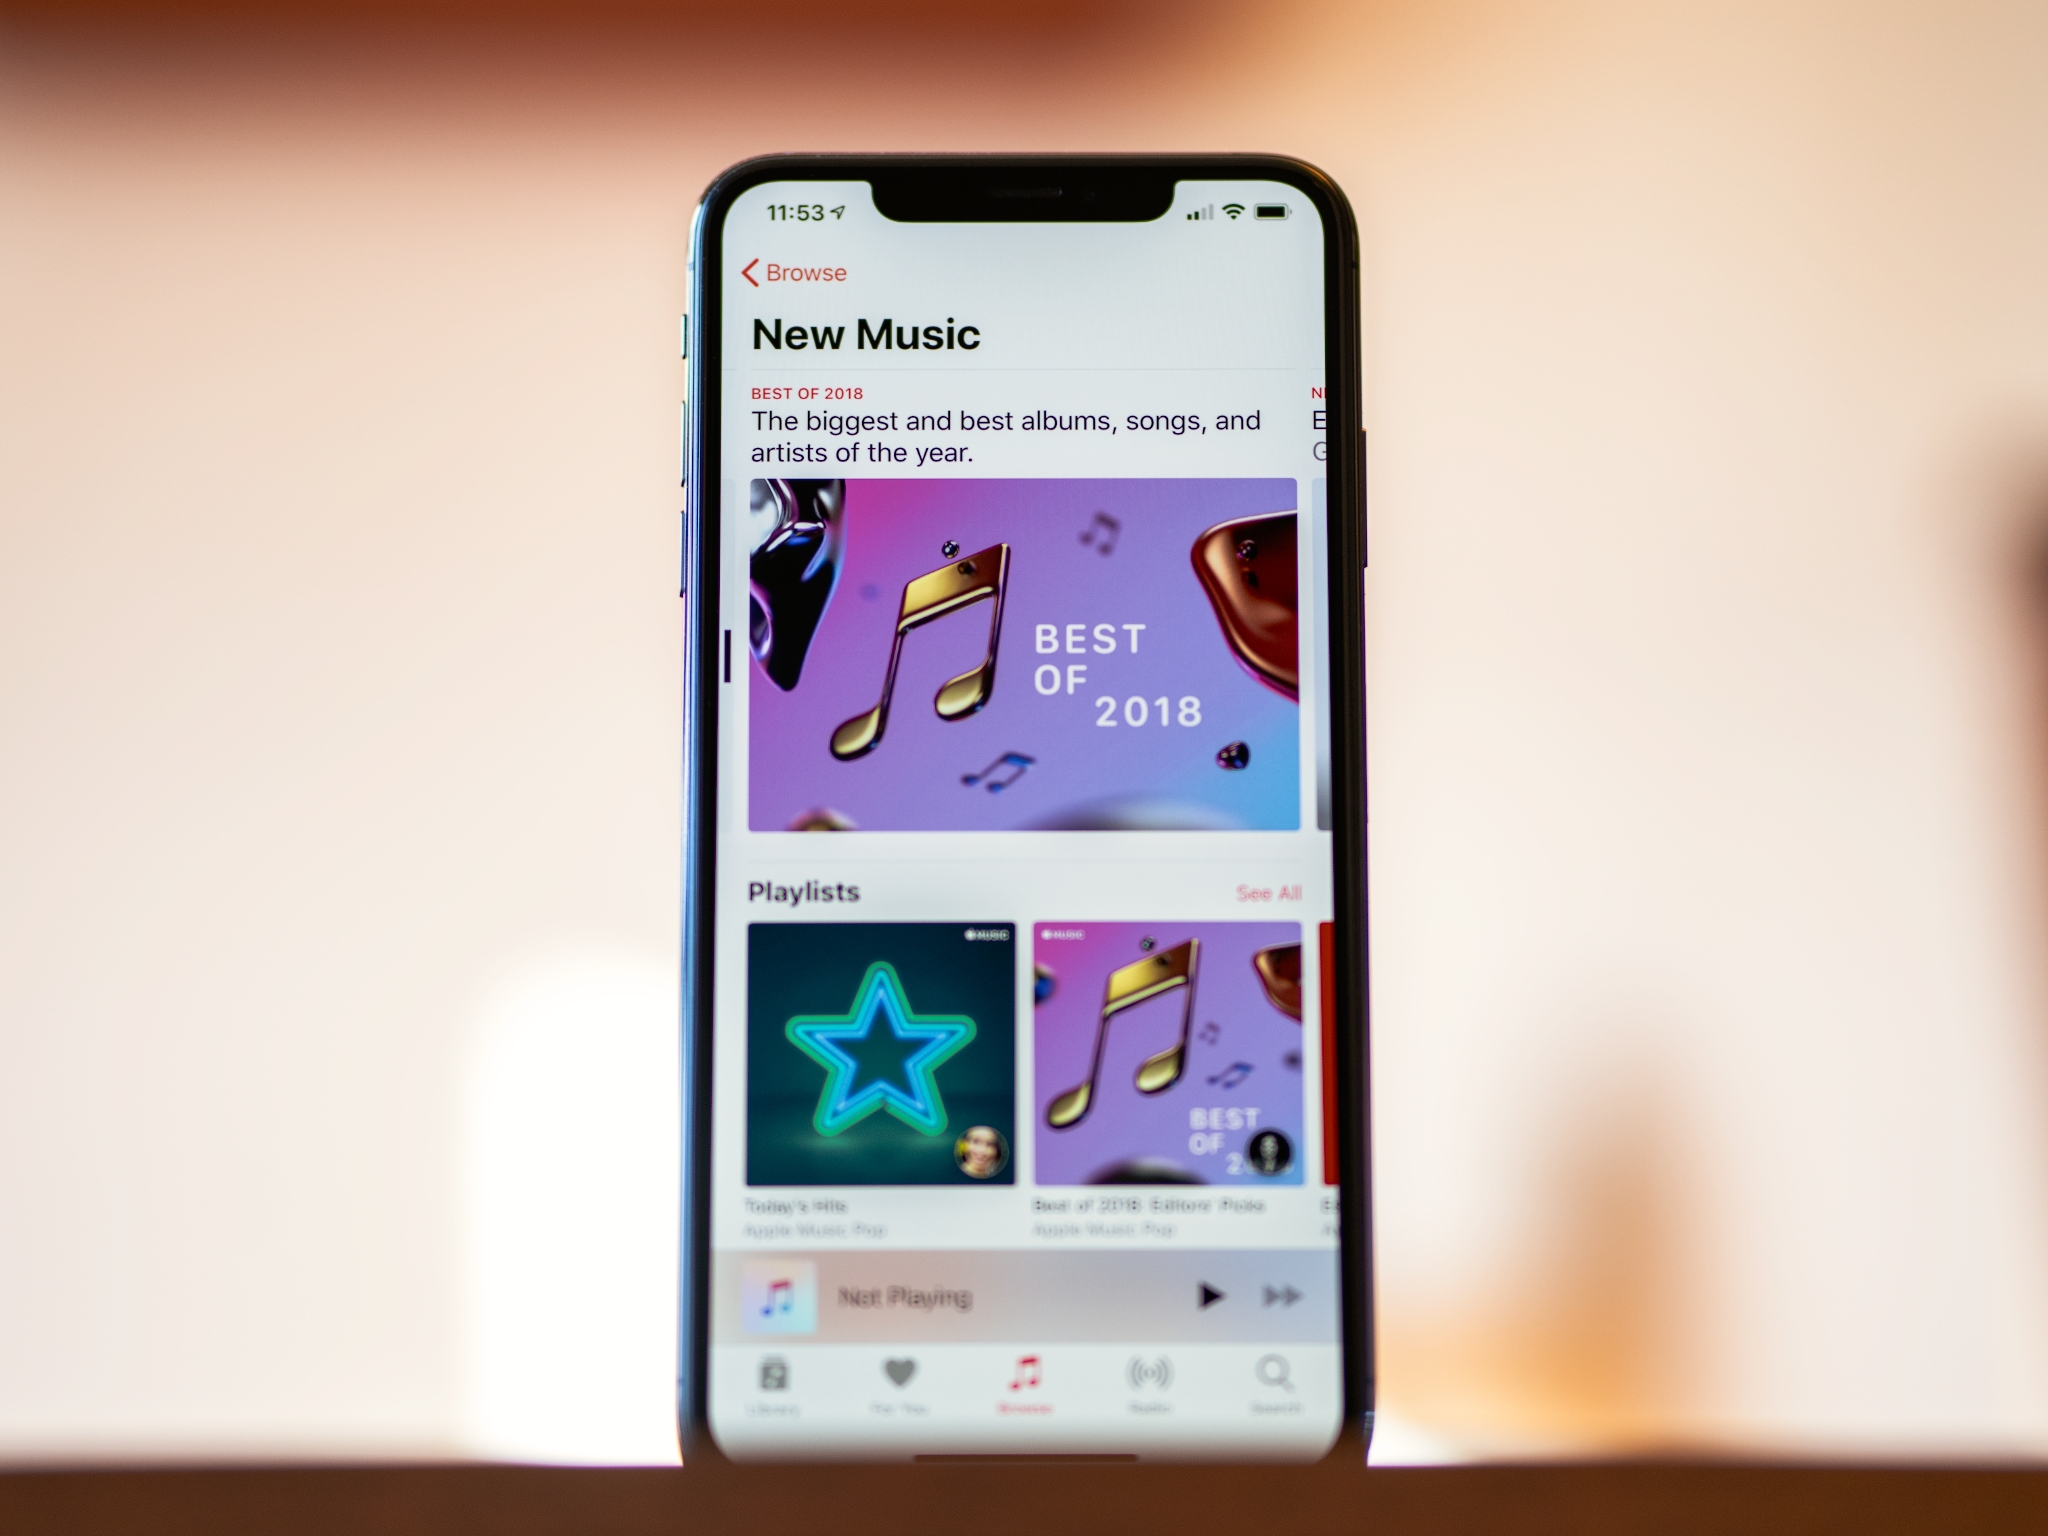 How to view and share playlists with friends in Apple Music